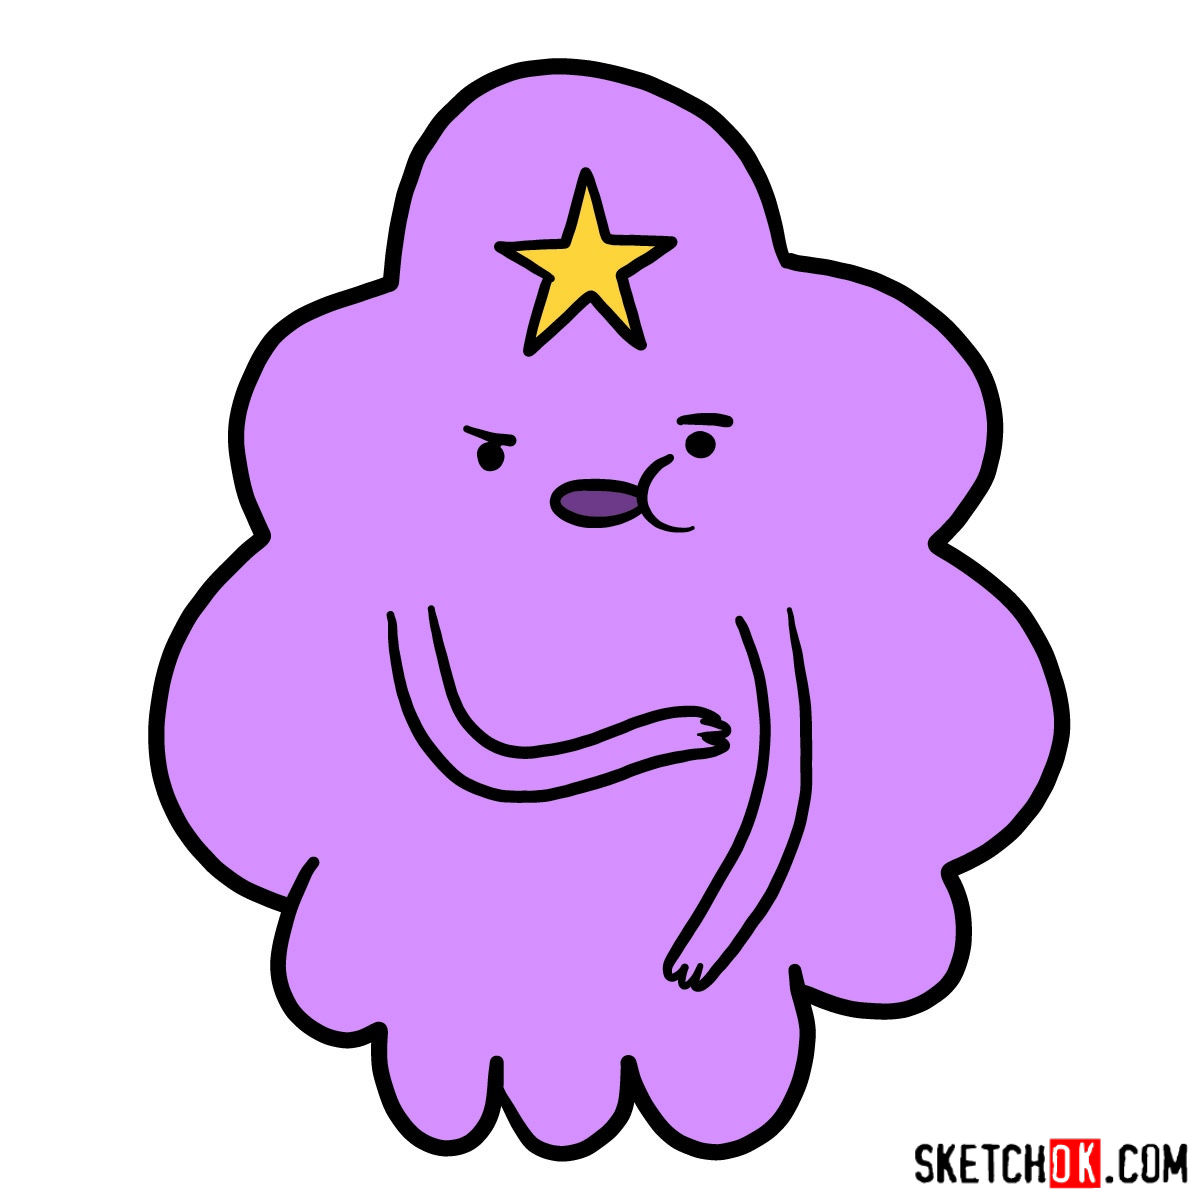 How to draw Lumpy Space Princess